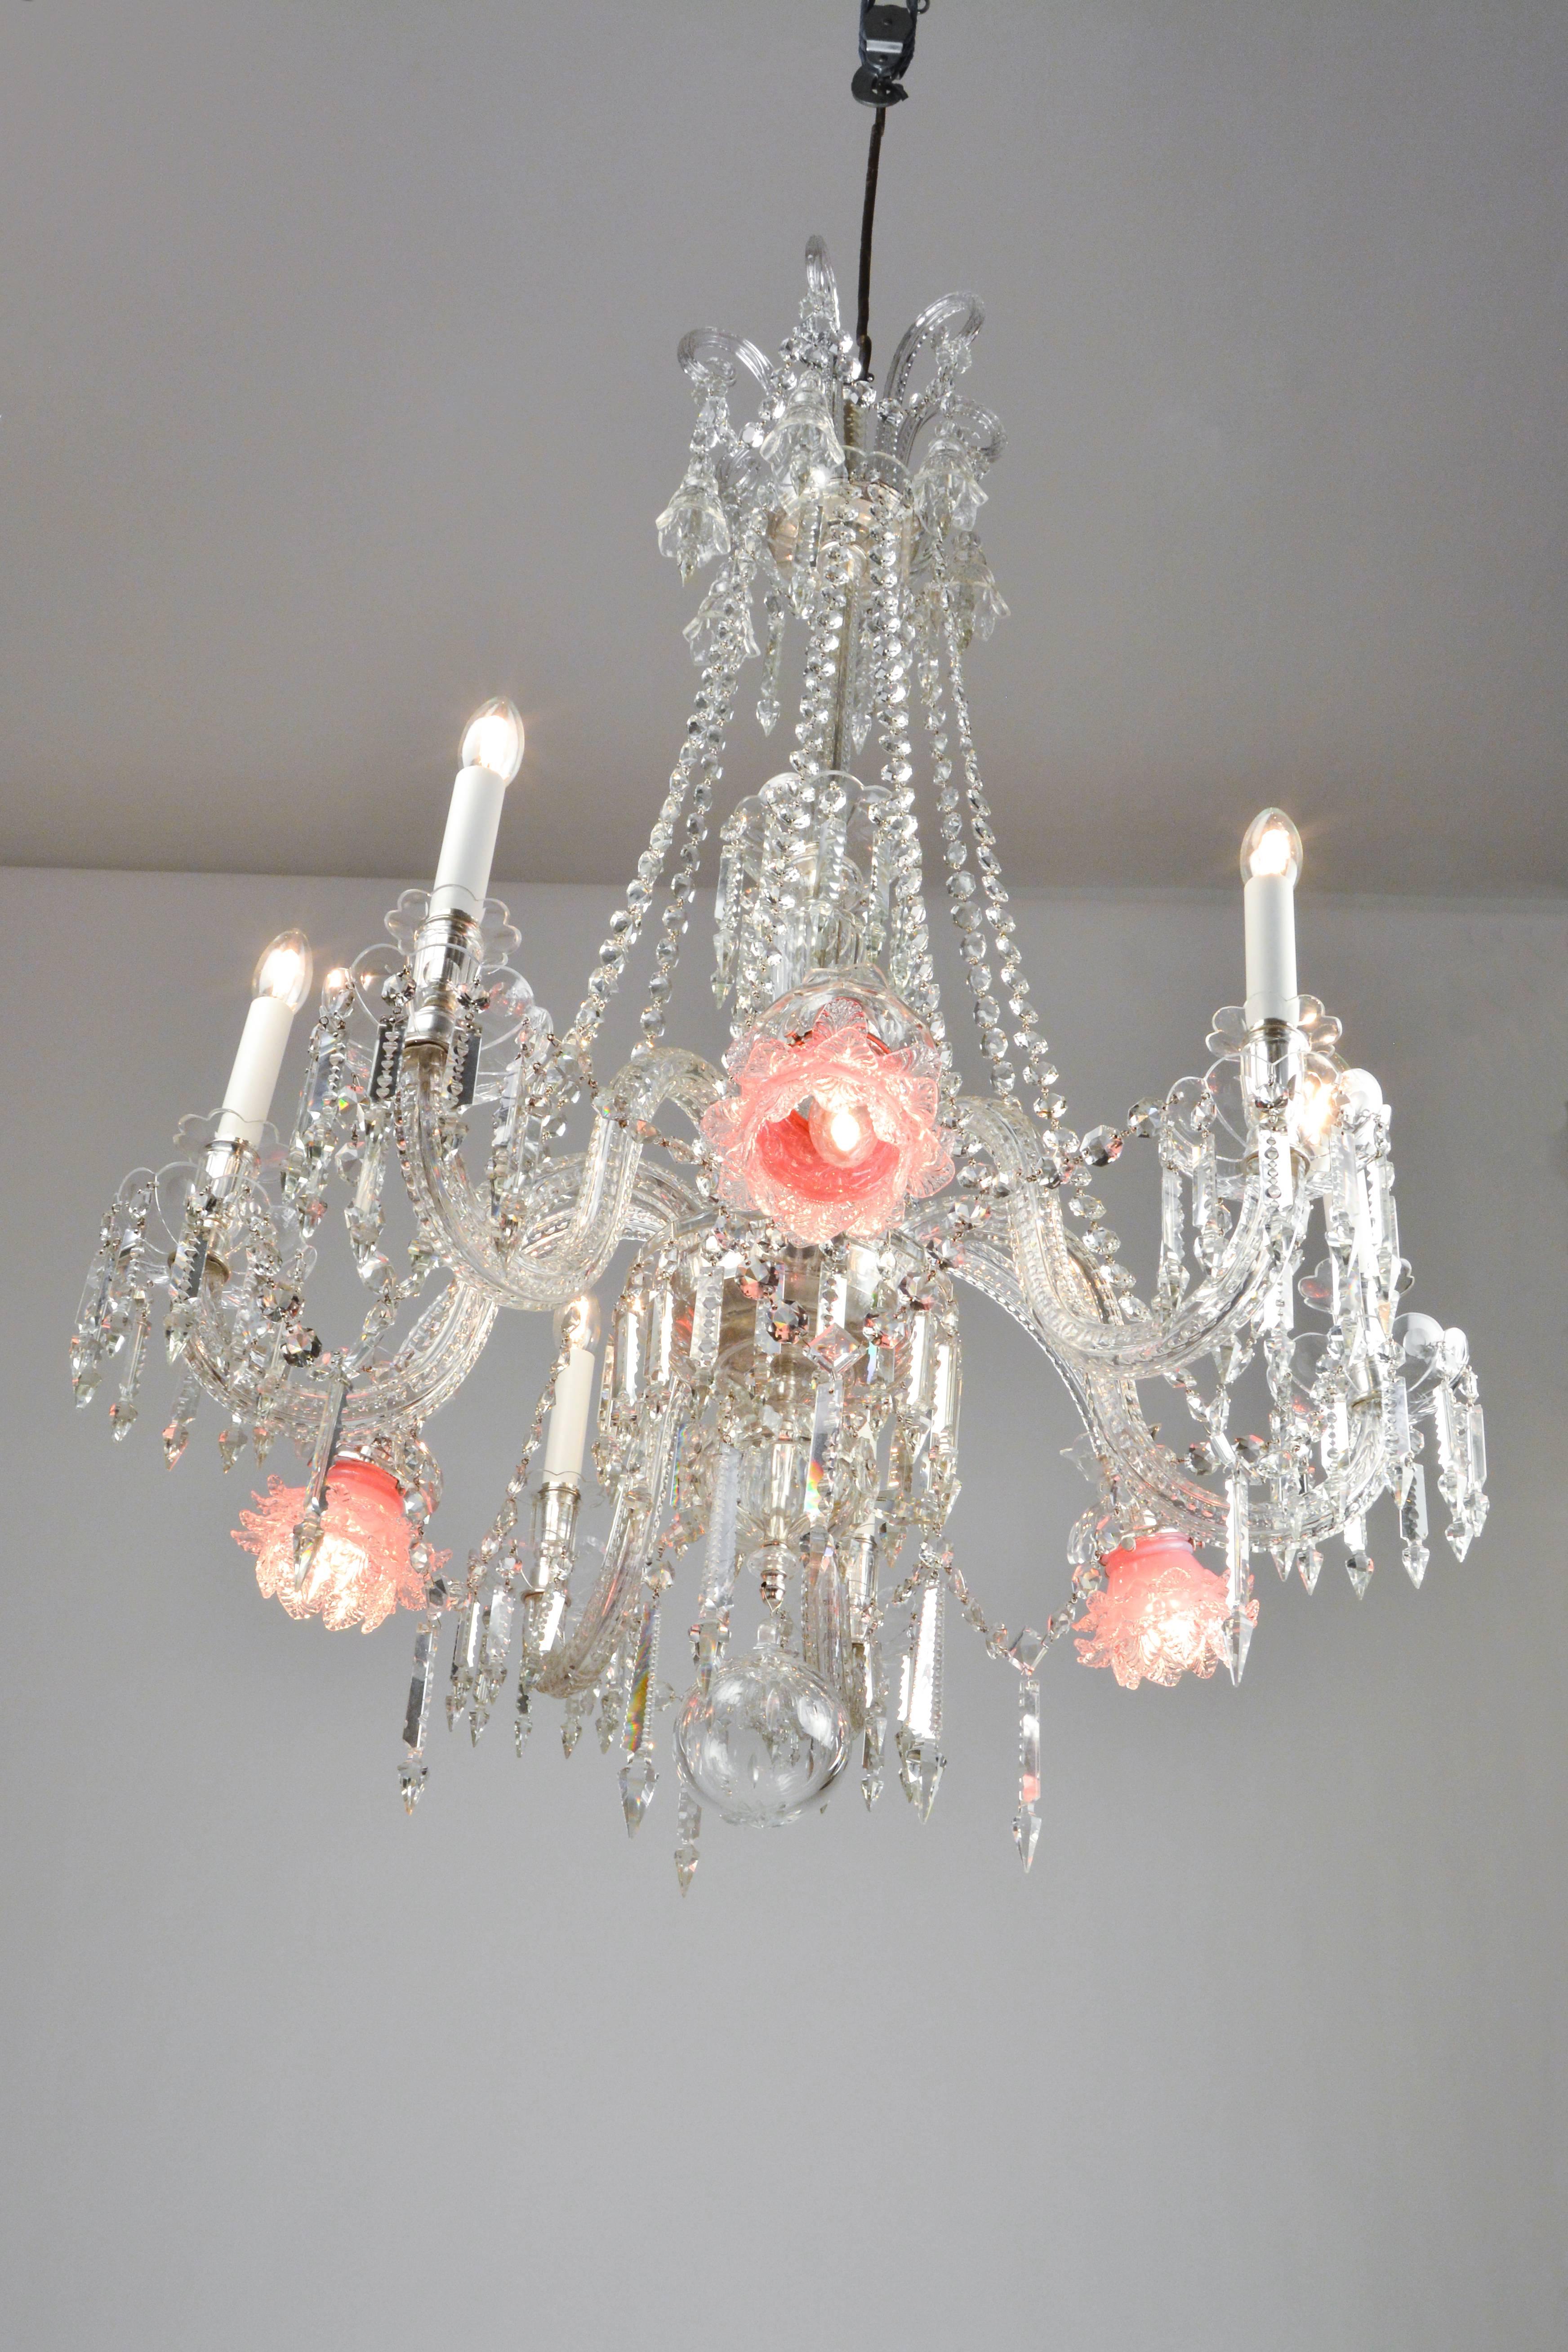 Six-arm chandelier with slender column and tender chains. Extravagant details are the three downward-curved extra arms and their pink flower-shaped glass shades. All arms are extravagantly cut and polished. The crystal sockets on the candles add to